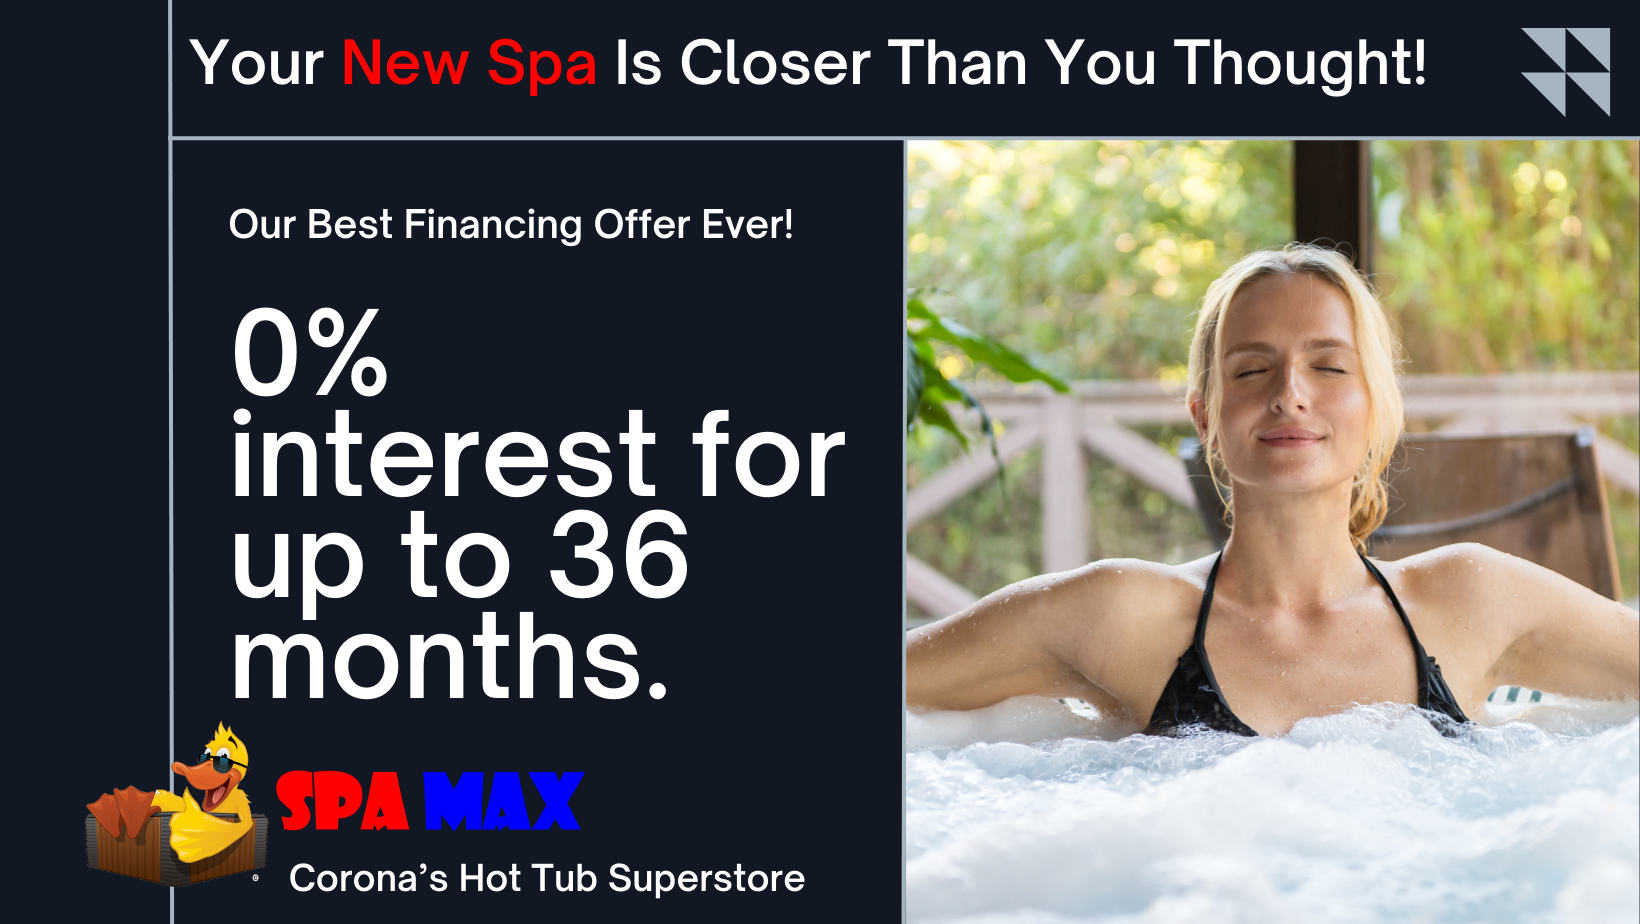 Your New Spa Is Closer Than You Thought!